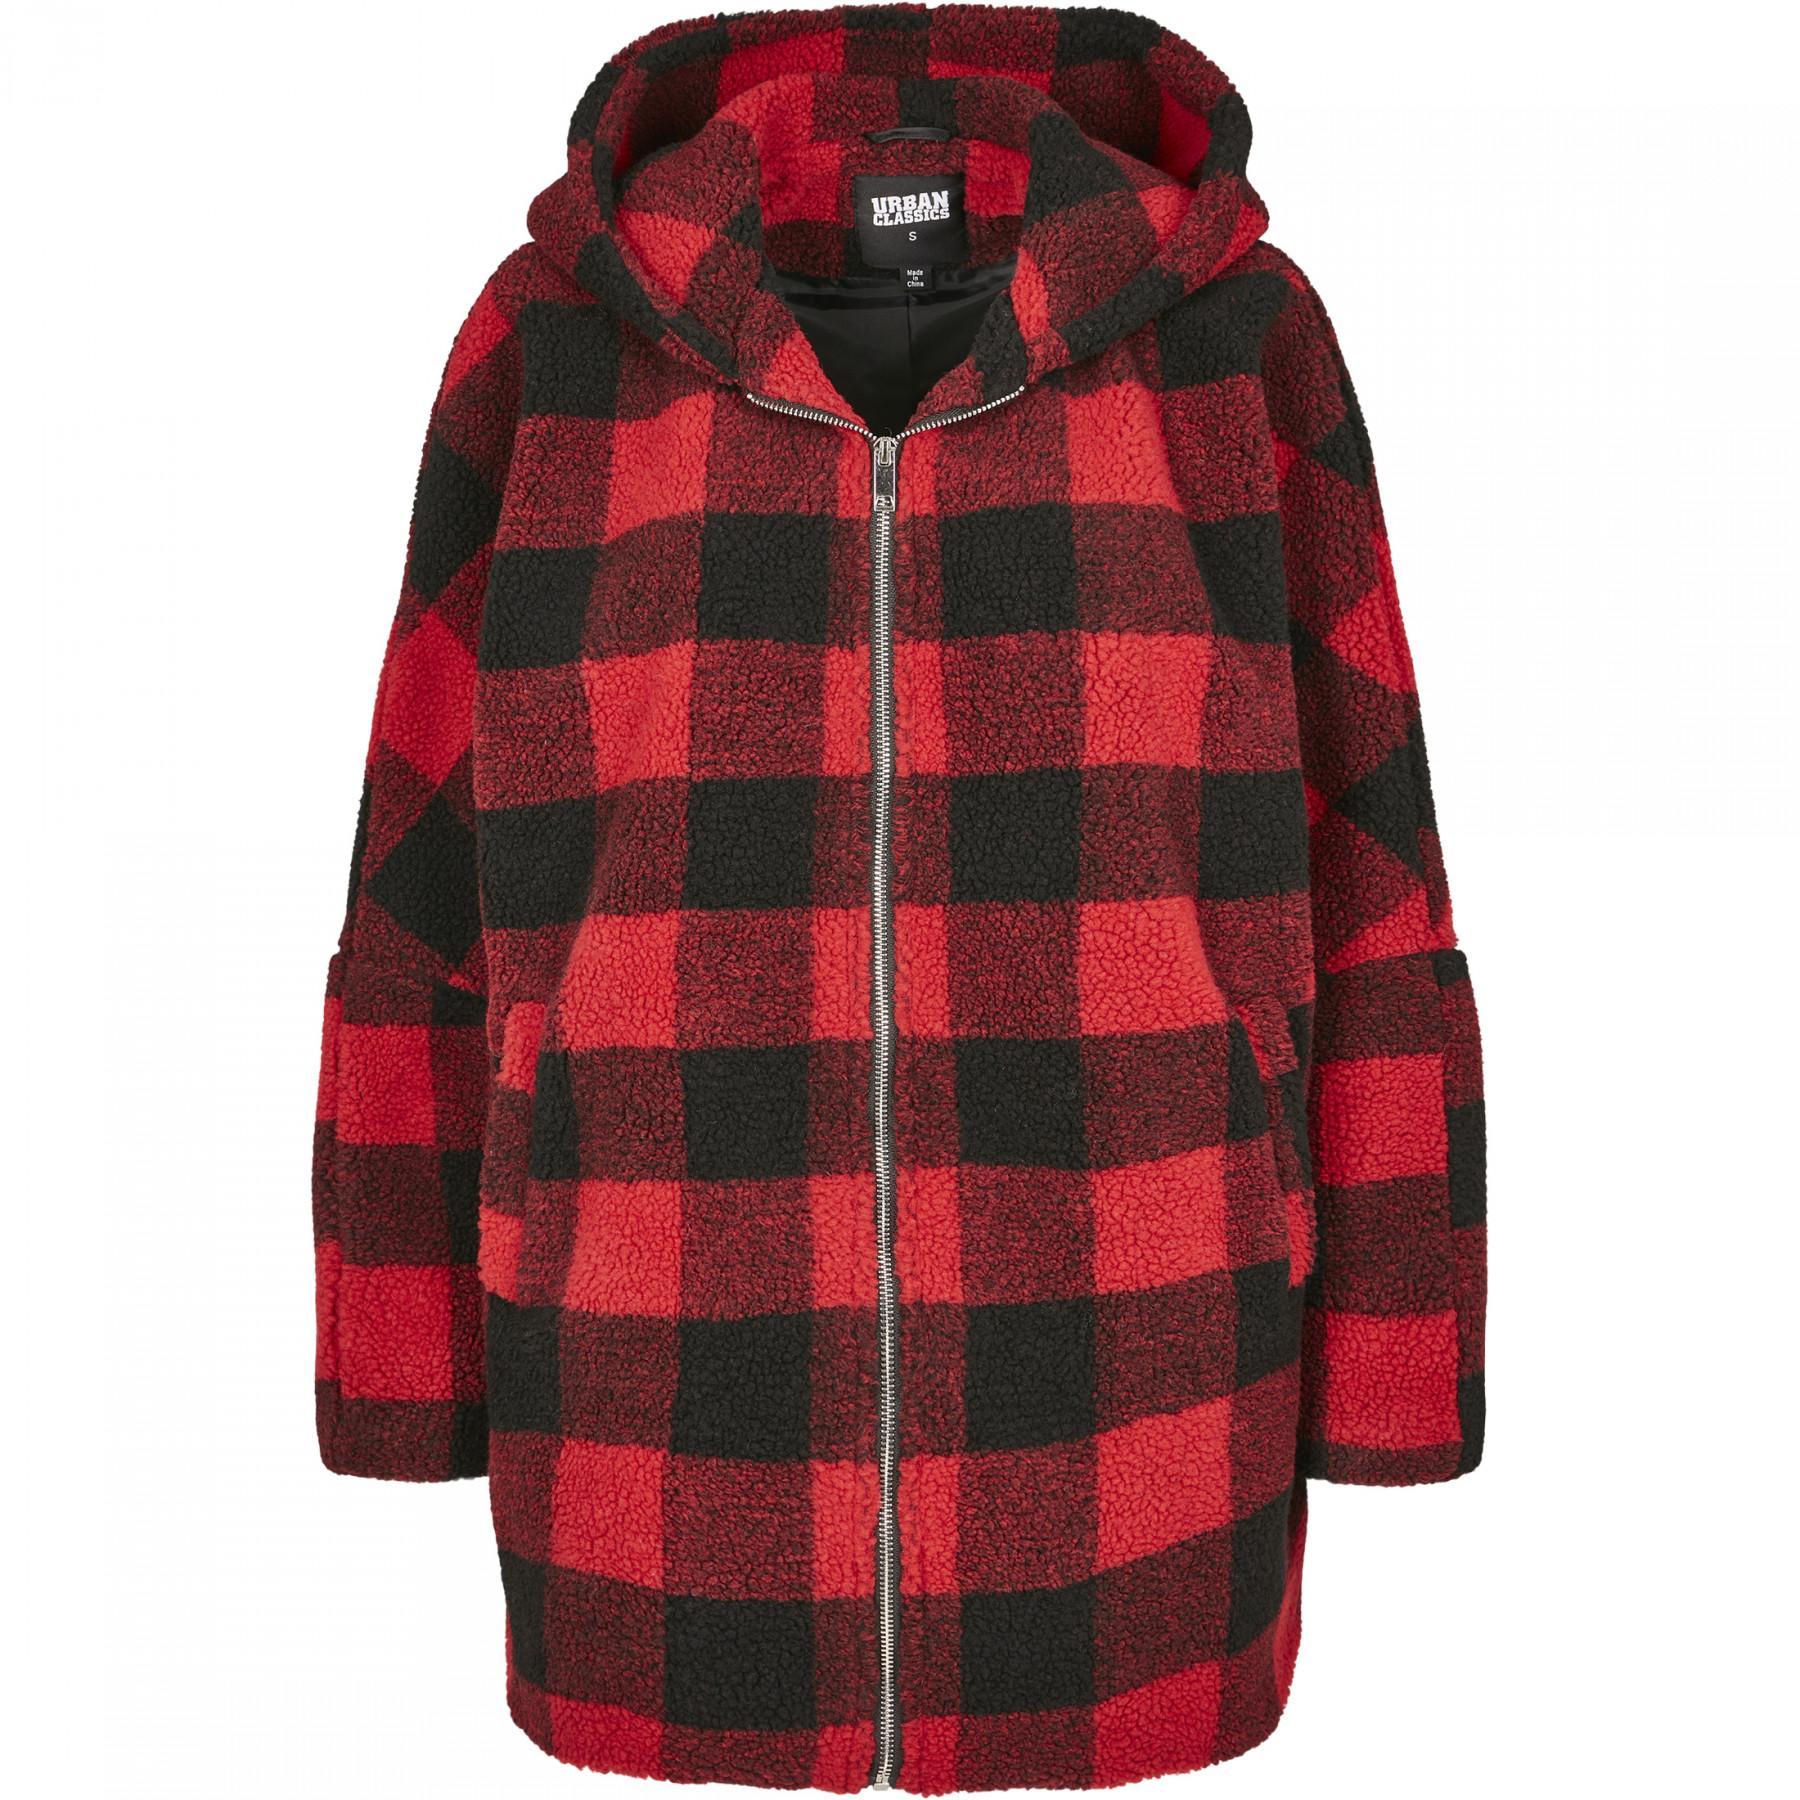 Women's Urban Classic hooded check parka